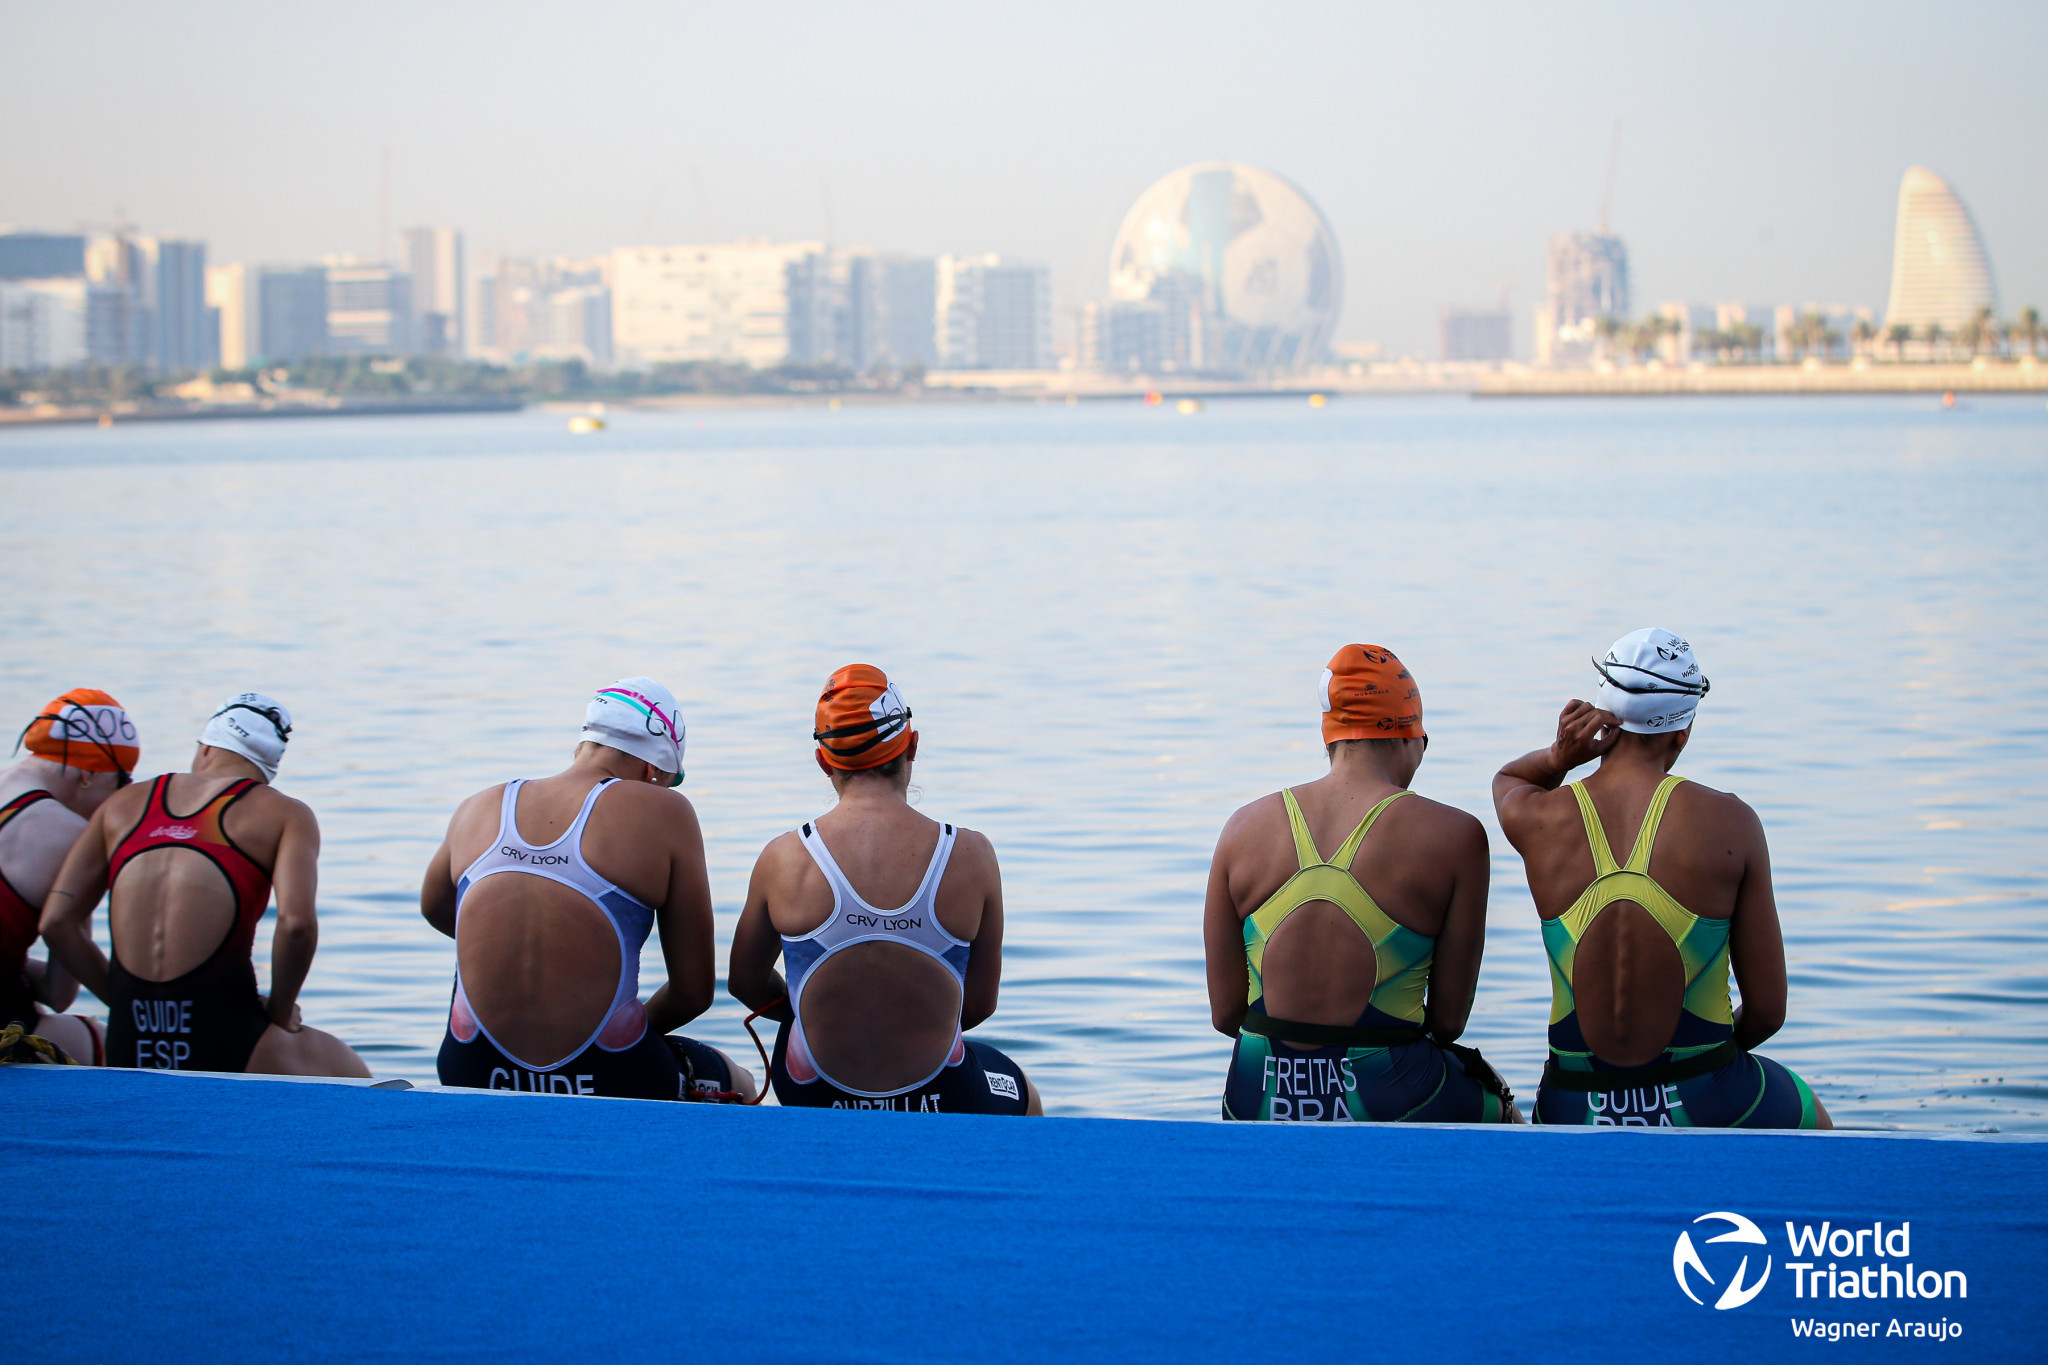 Having held the final event of this season, Abu Dhabi has been approved to host the 2023 World Triathlon Championship Series opener ©World Triathlon